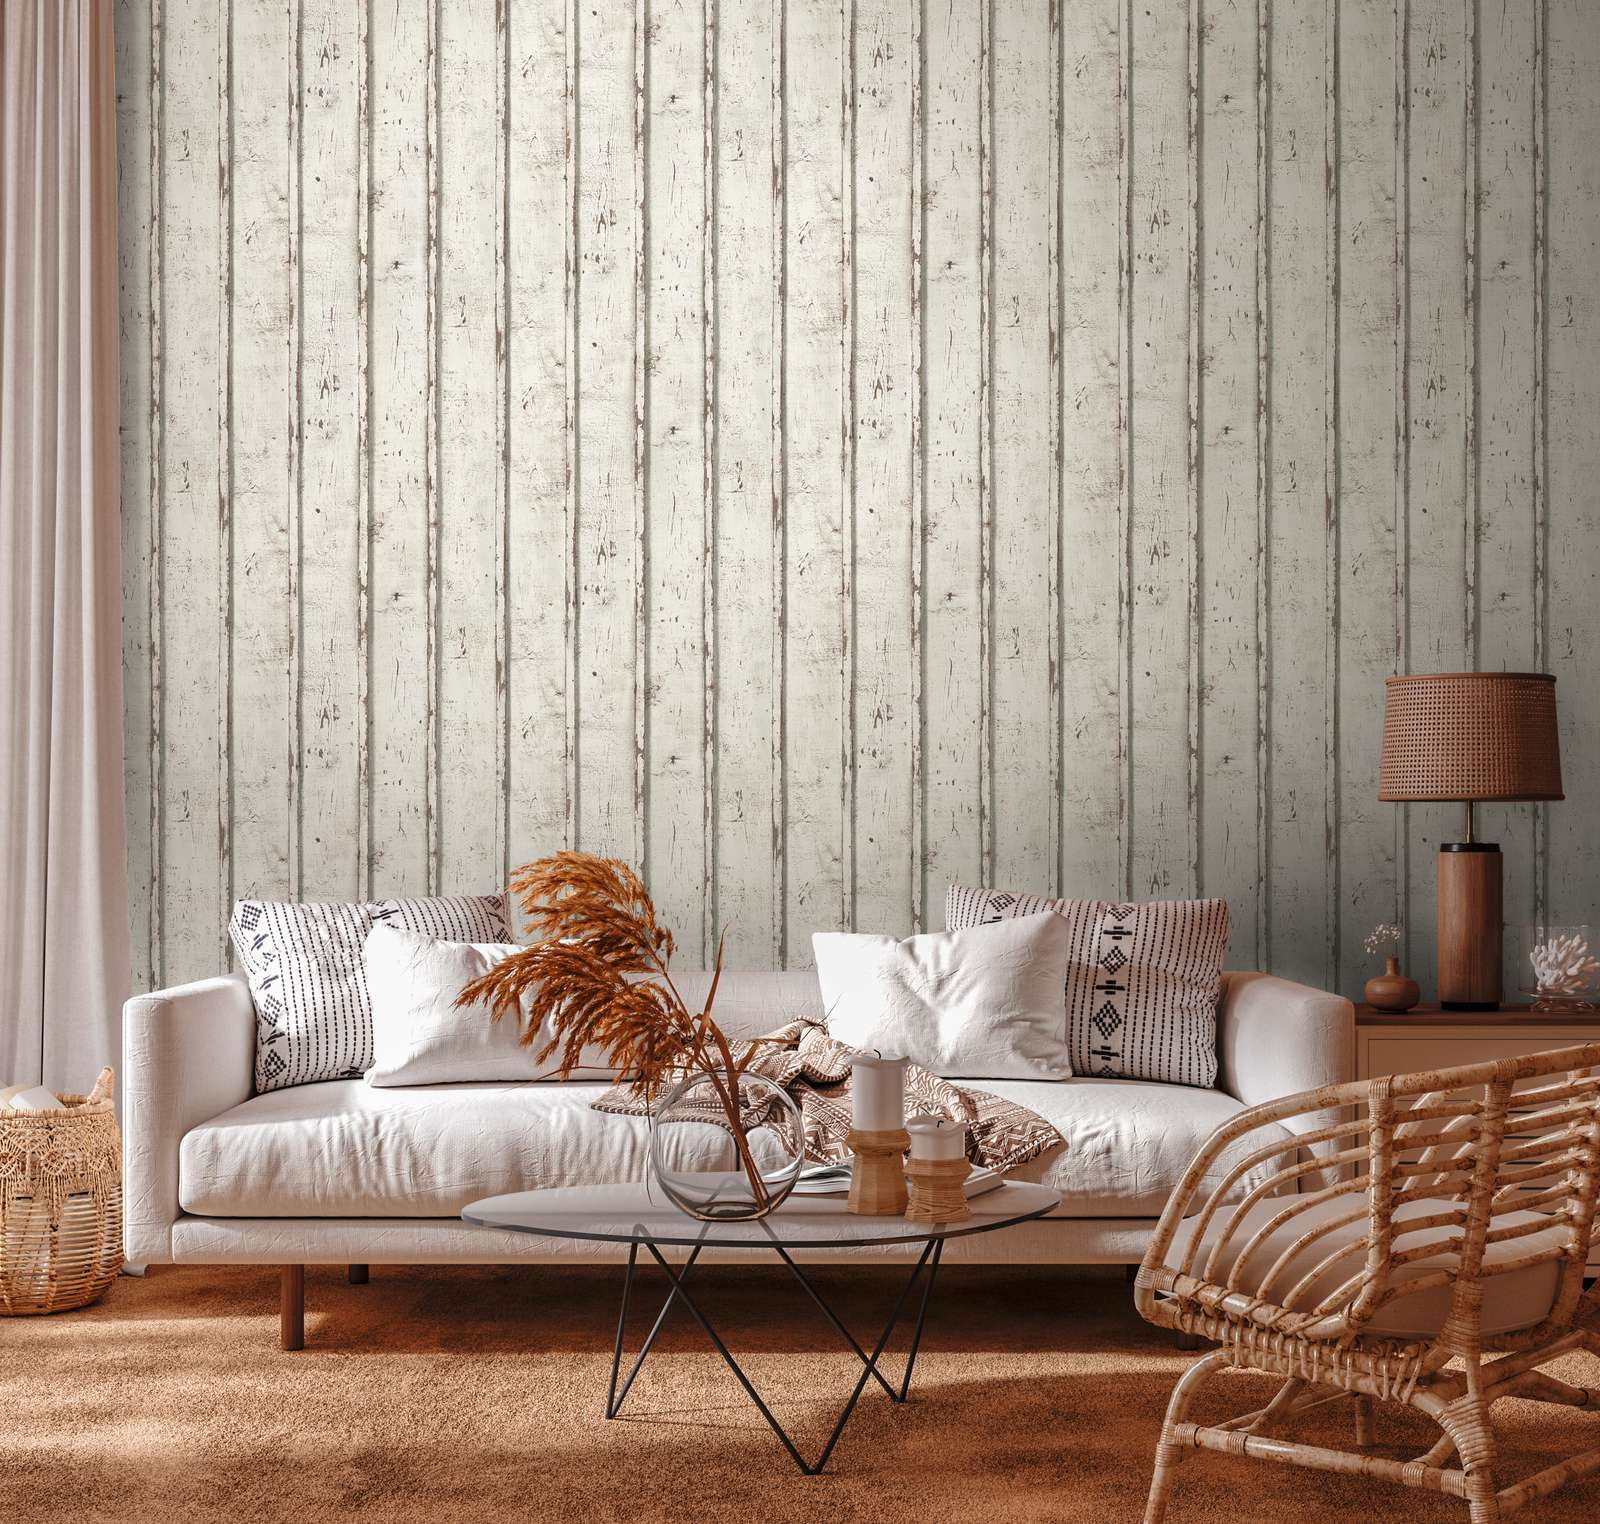             Wooden wallpaper in used look with weathered wooden boards - white, cream, grey
        